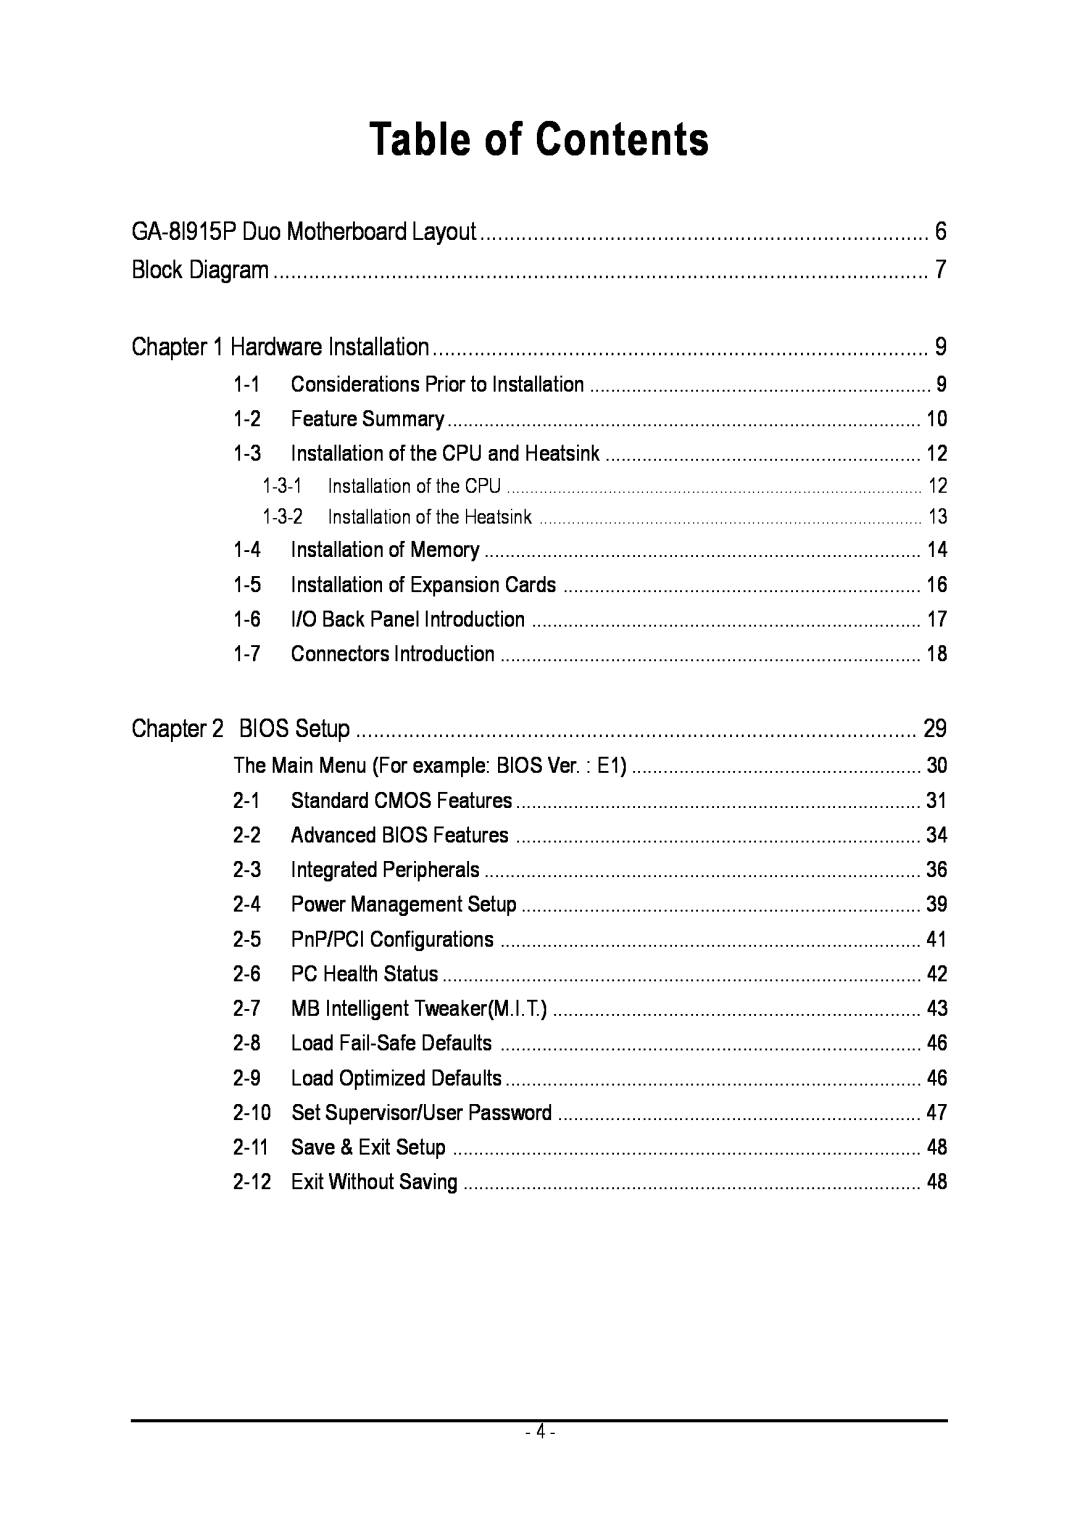 Gigabyte GA-8I915P DUO user manual Table of Contents 